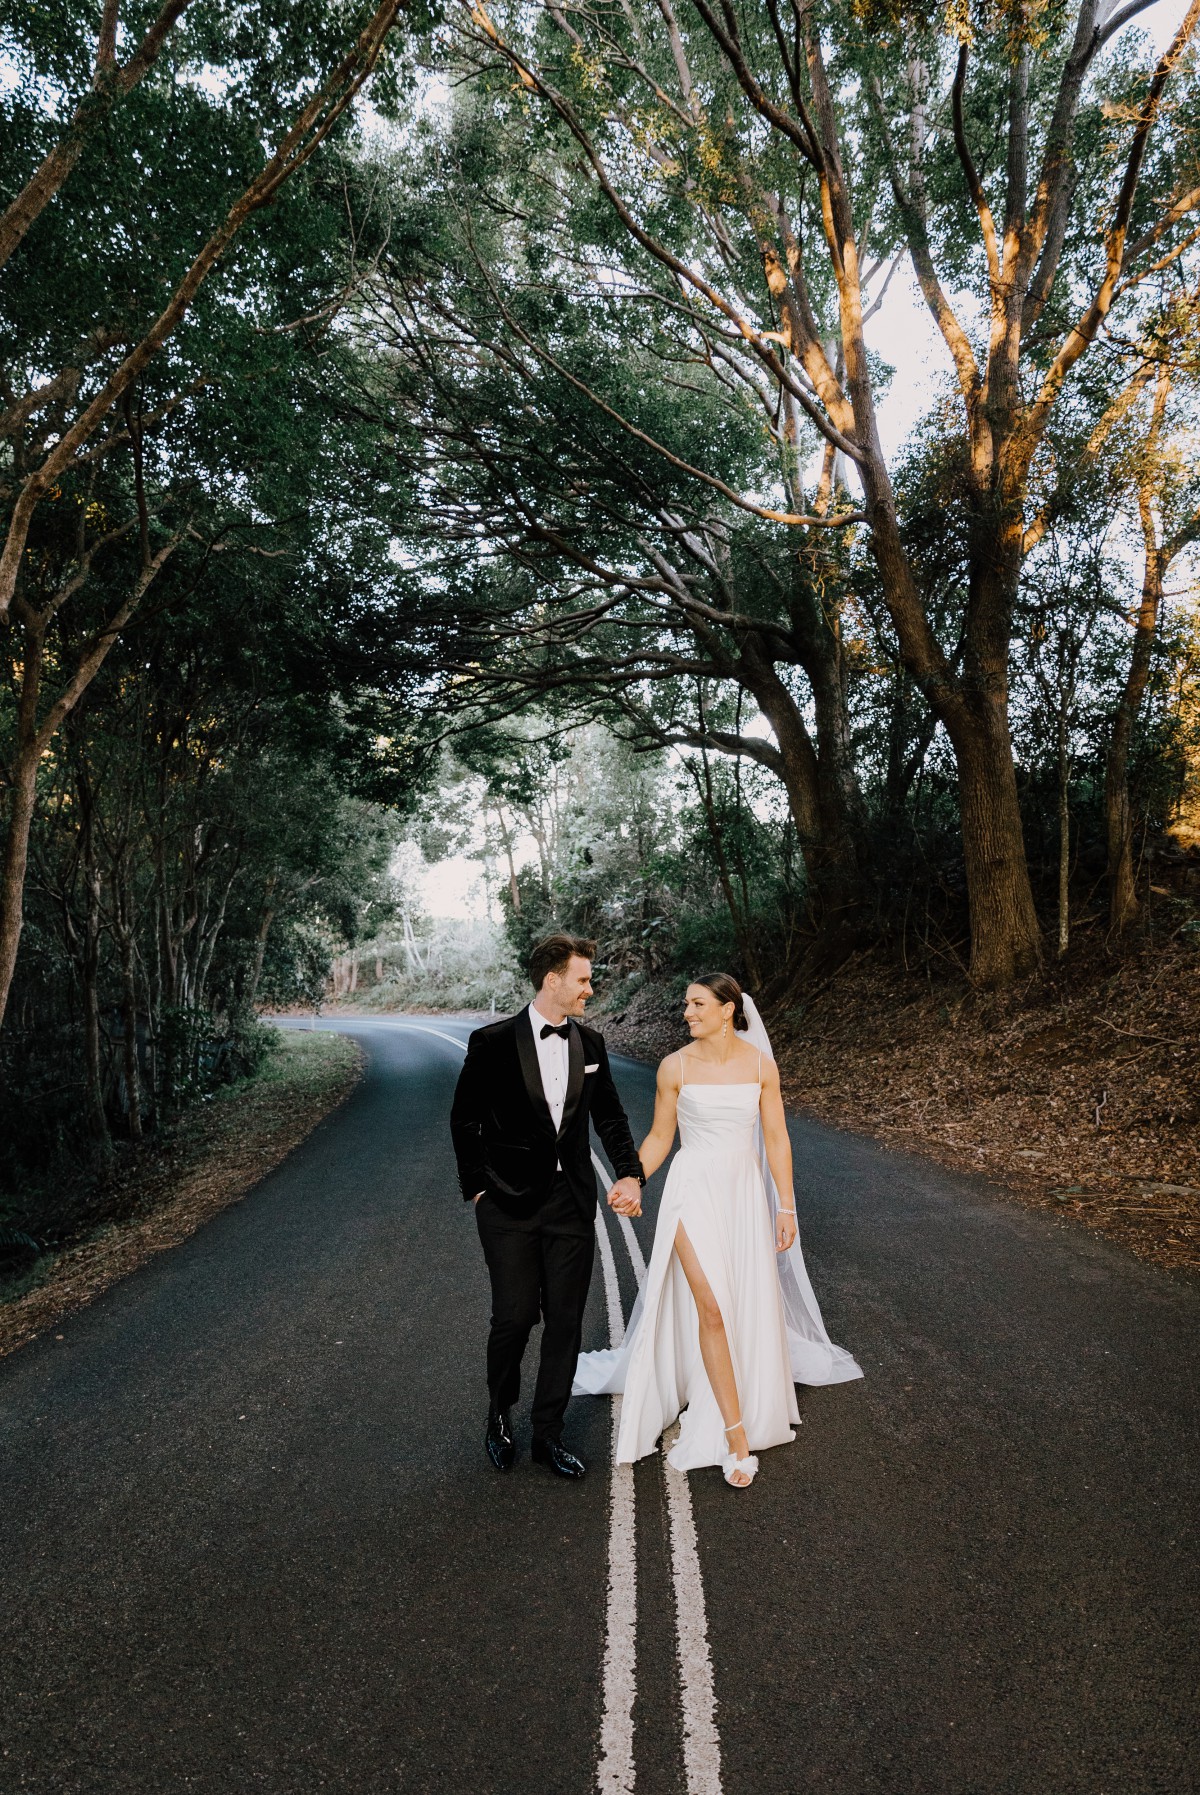 Bride and groom walk on the road with lush greenery and trees behind, photographed by wedding photographer Kirk Willcox Photography